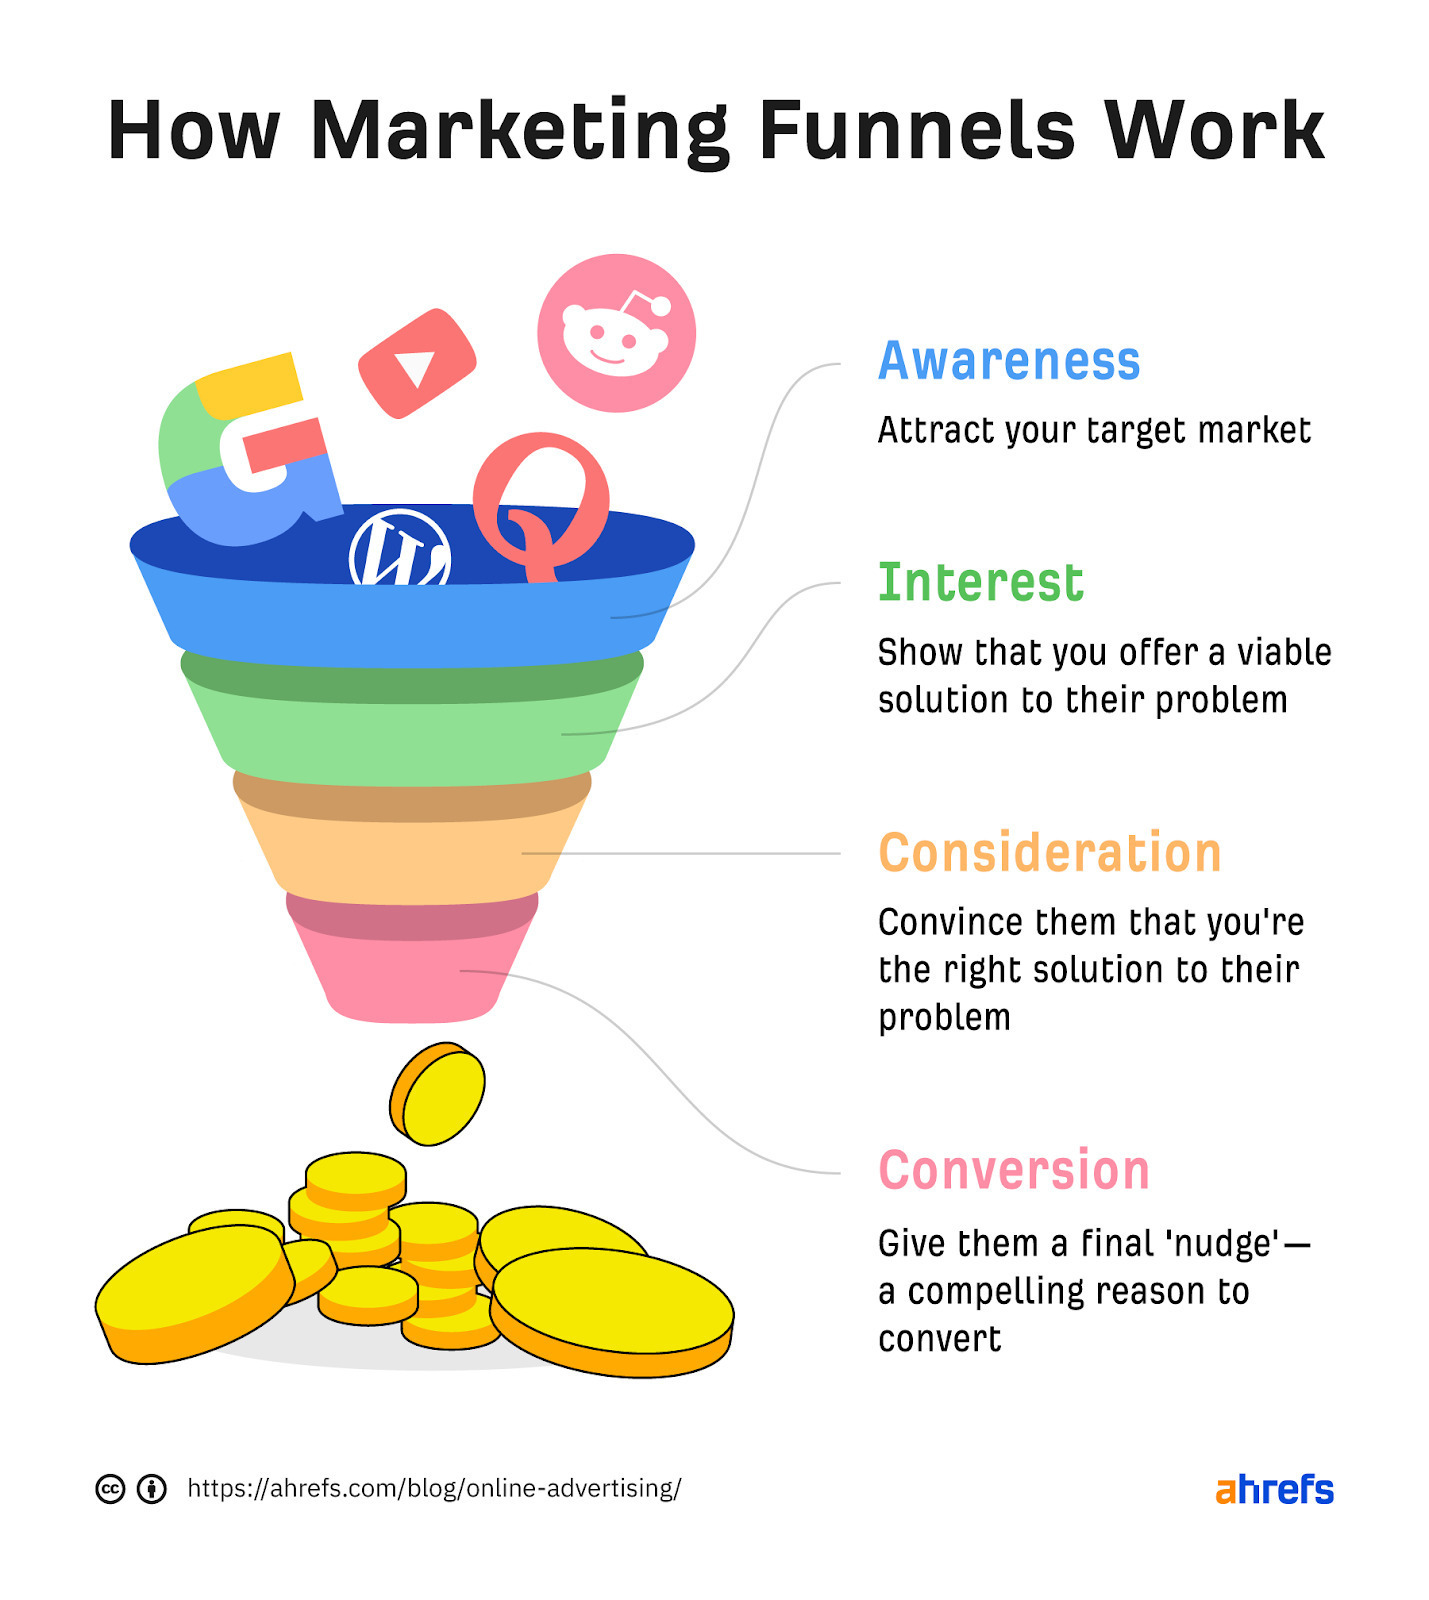 Funnel with four sections. From top to bottom (Awareness, Interest, Consideration, Conversion)